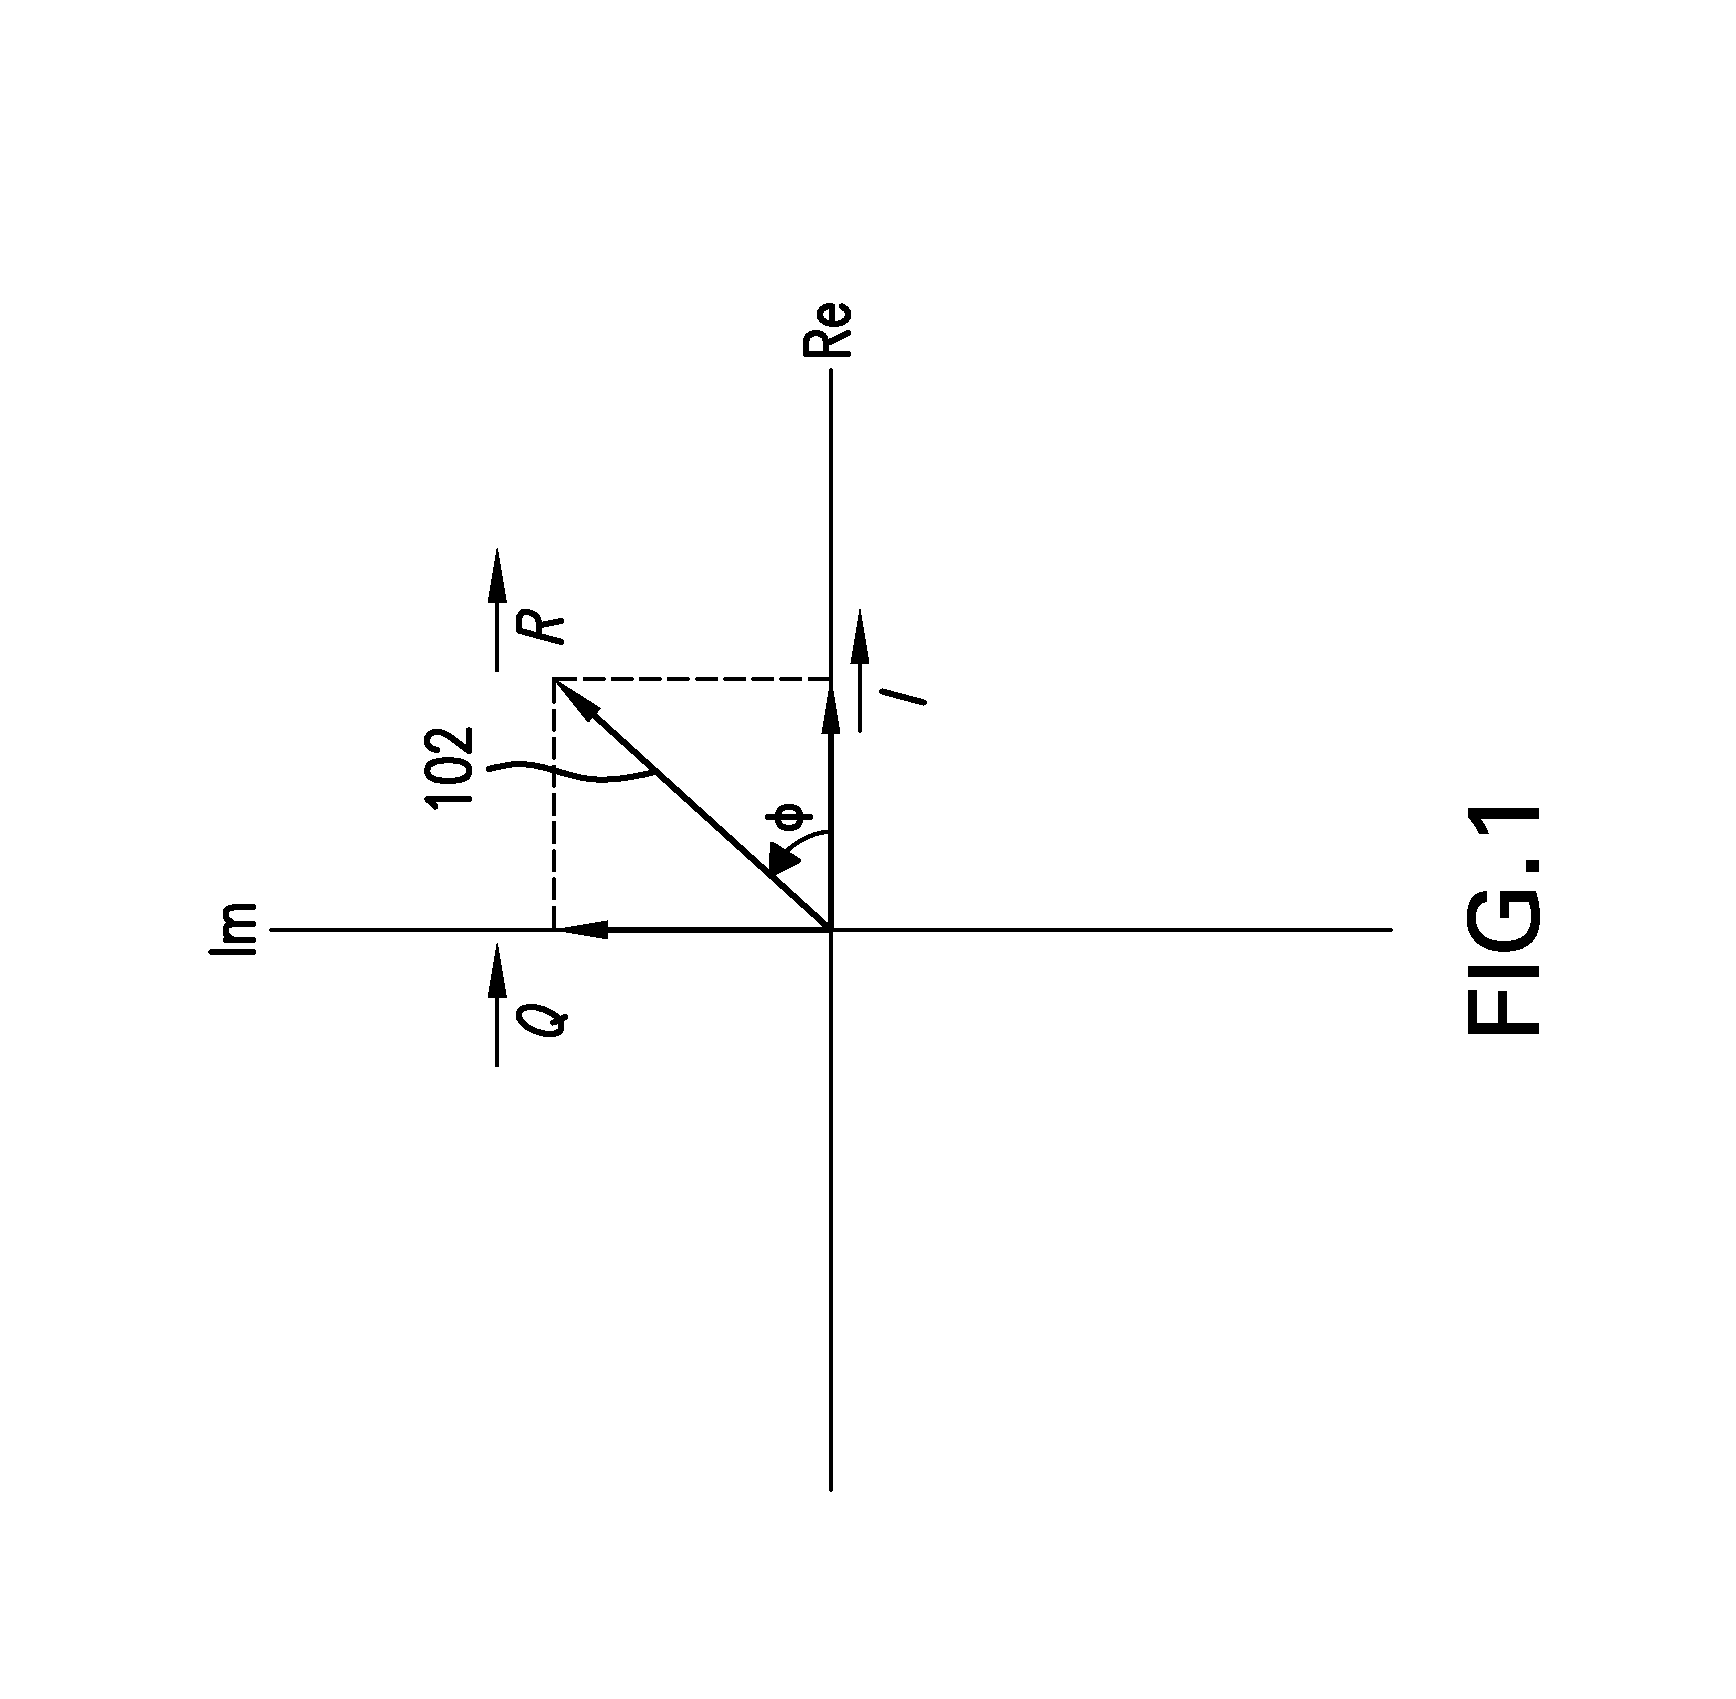 Systems and methods of RF power transmission, modulation, and amplification